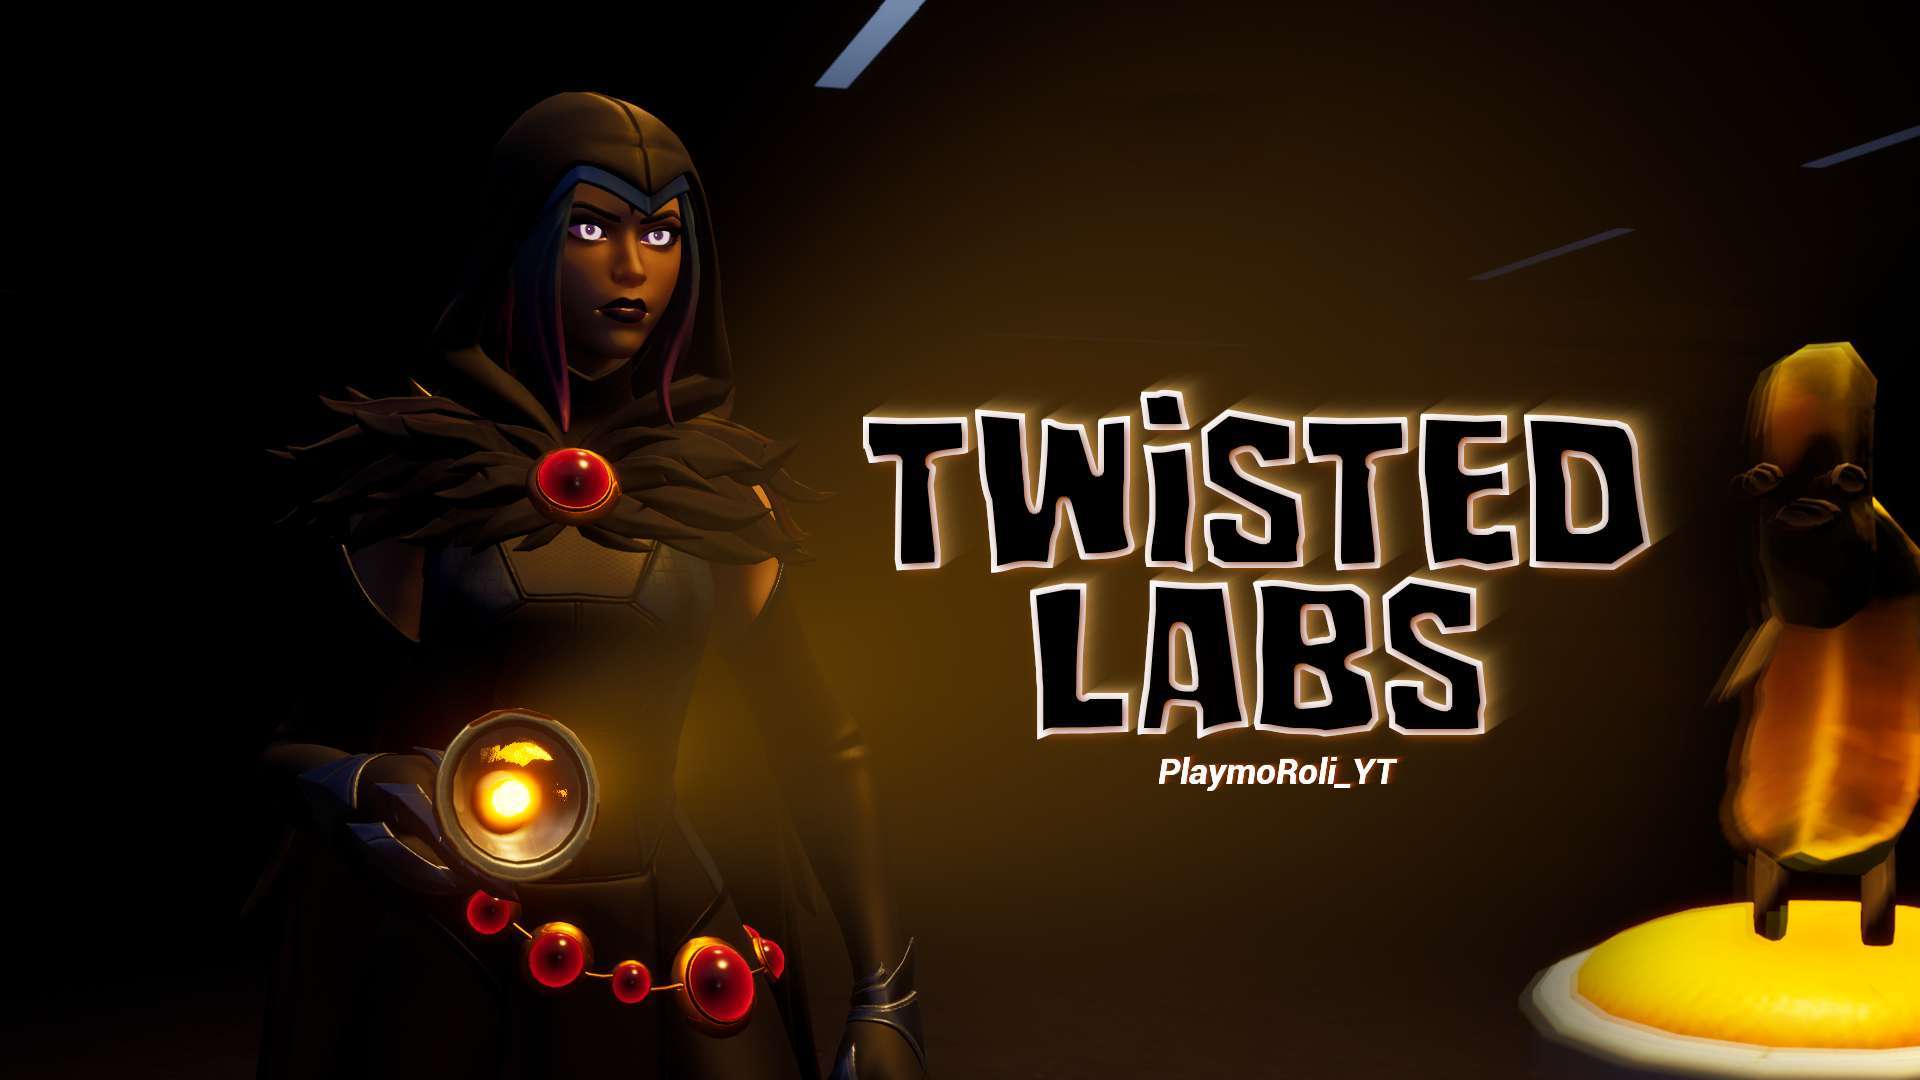 TWISTED LABS